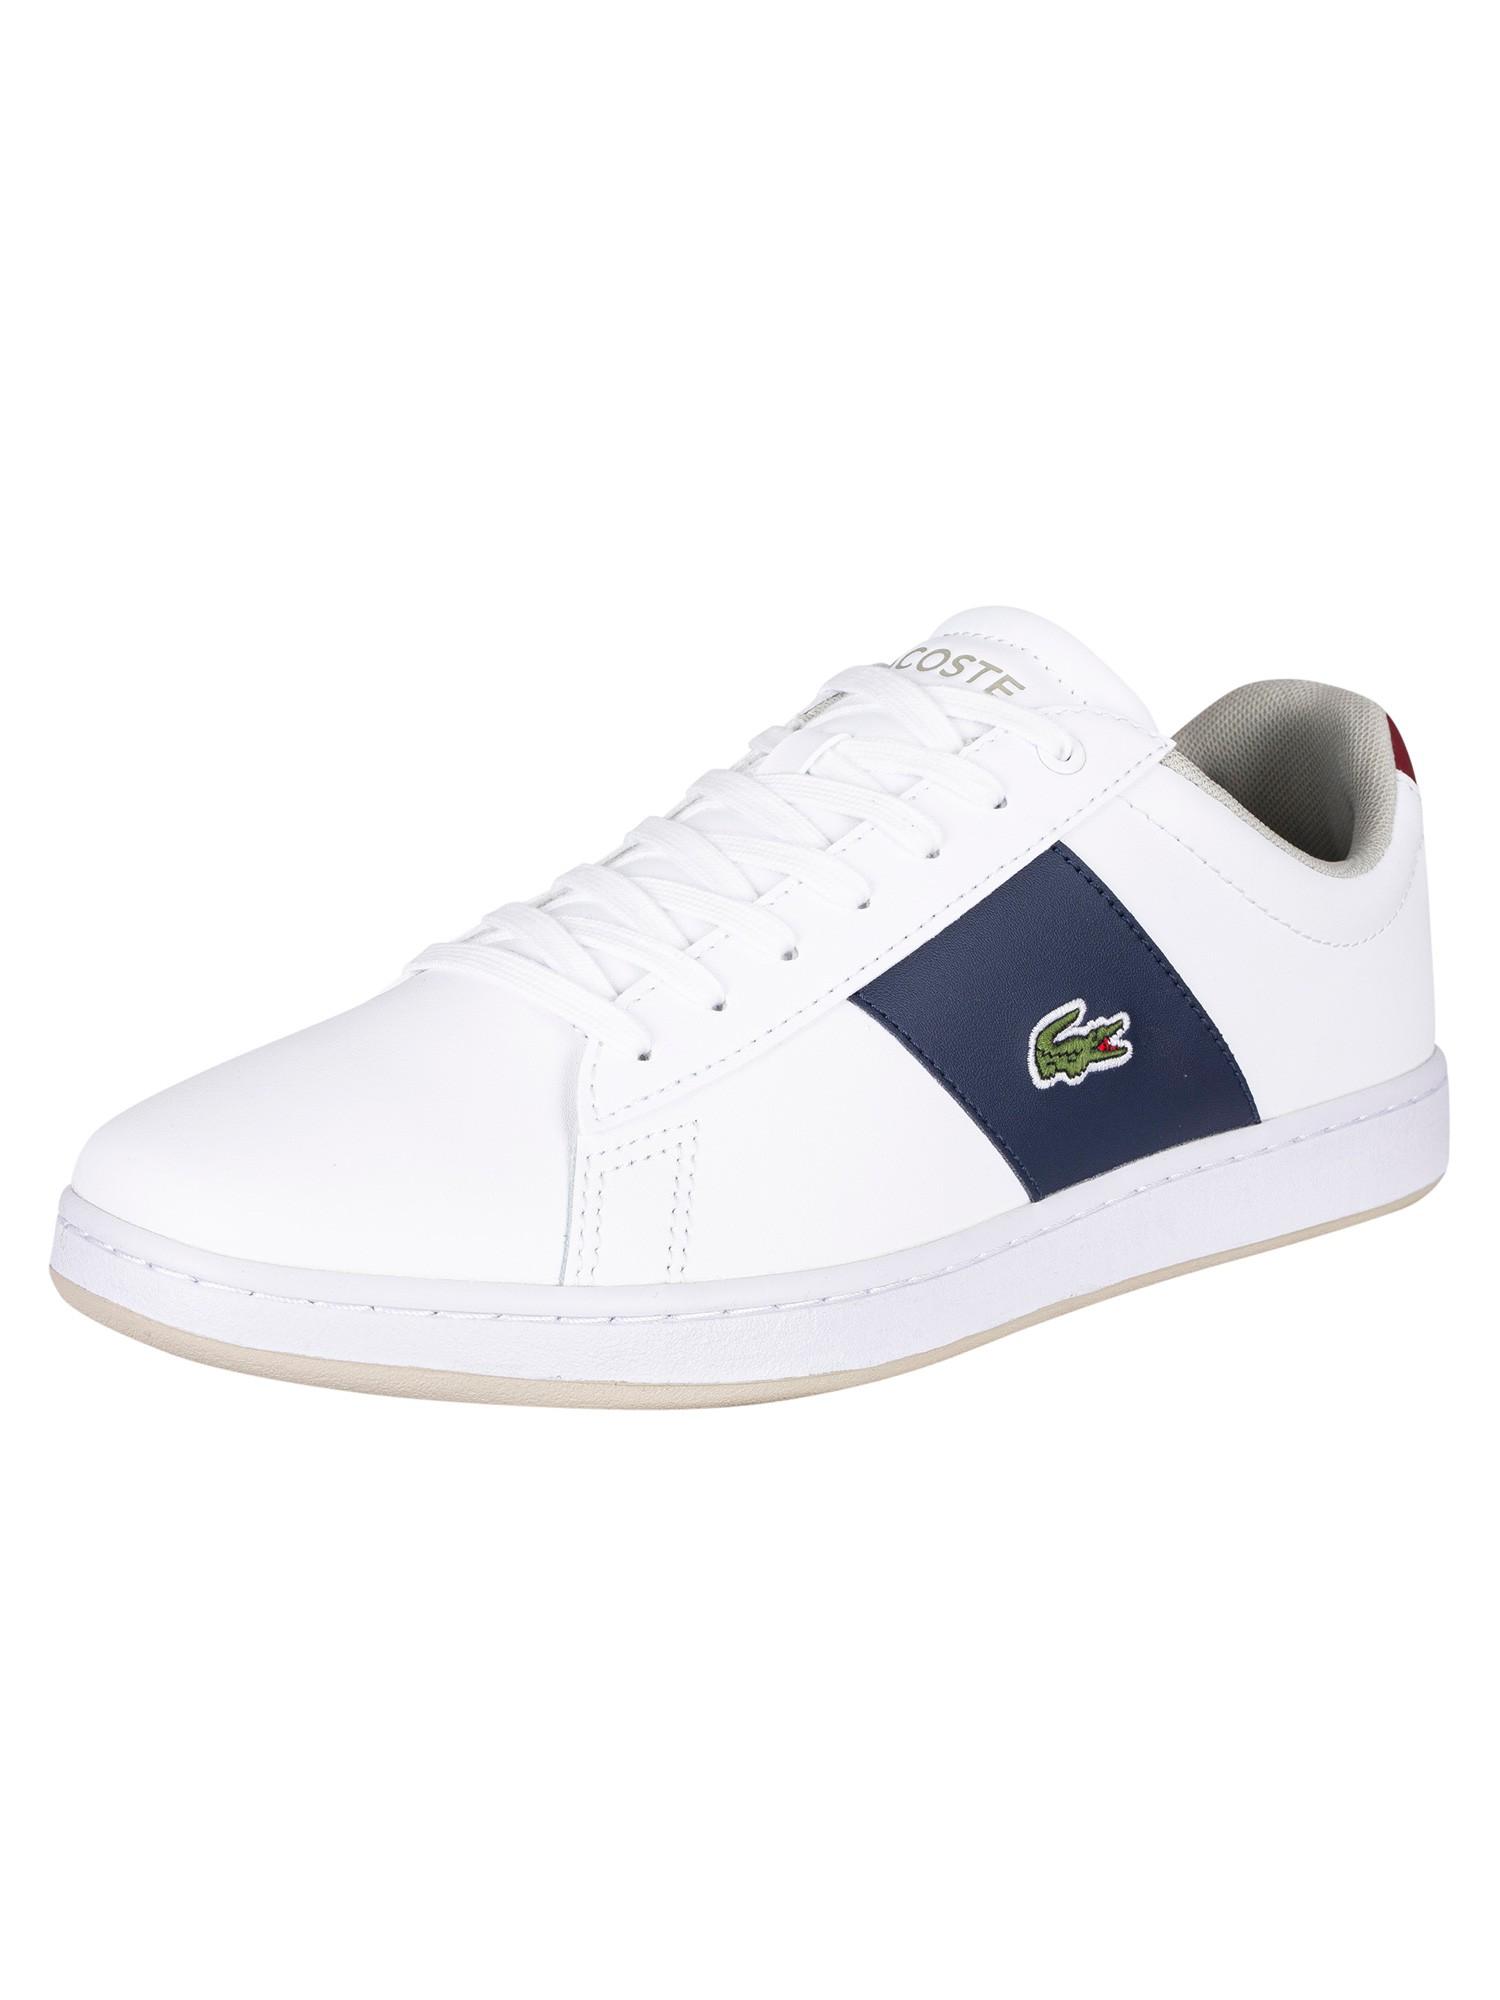 Lacoste Carnaby Evo Cgr Leather Trainers in Blue for Men | Lyst UK